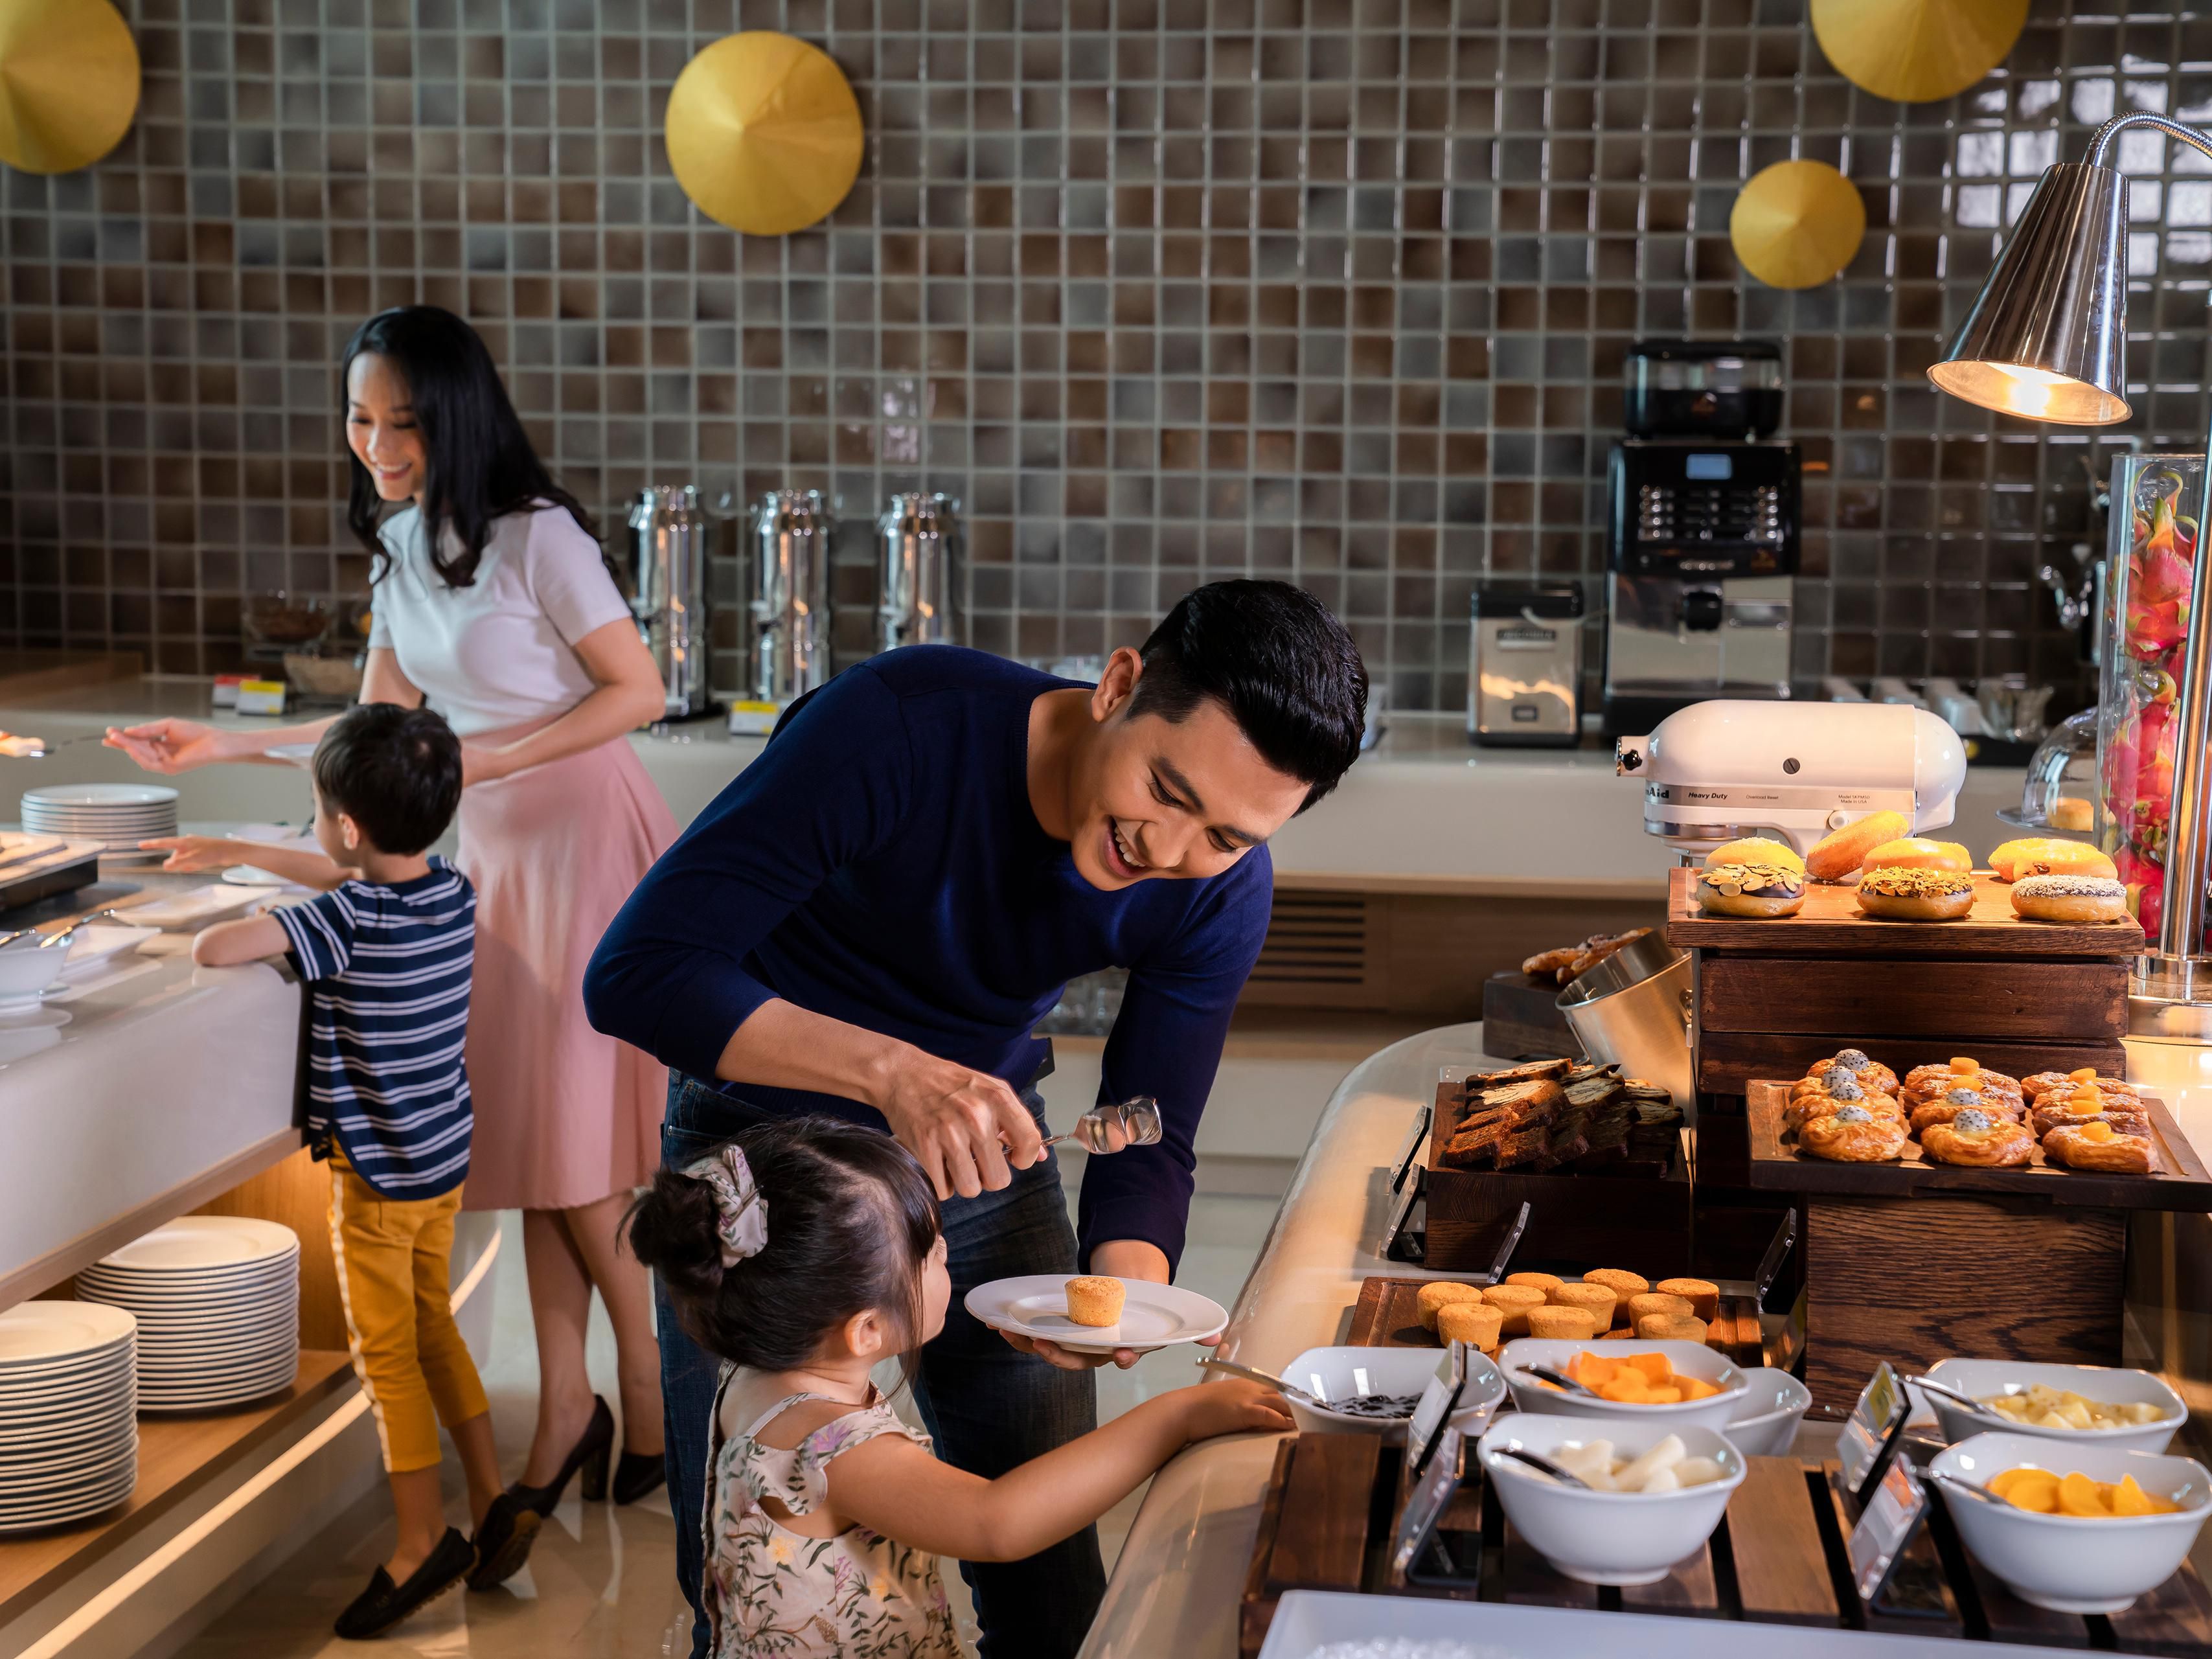 Kids ages 12 and under stay for free when sharing their parents’ room. Up to four kids ages 12 and under eat free any time of the day in any Holiday Inn® on-site restaurants.